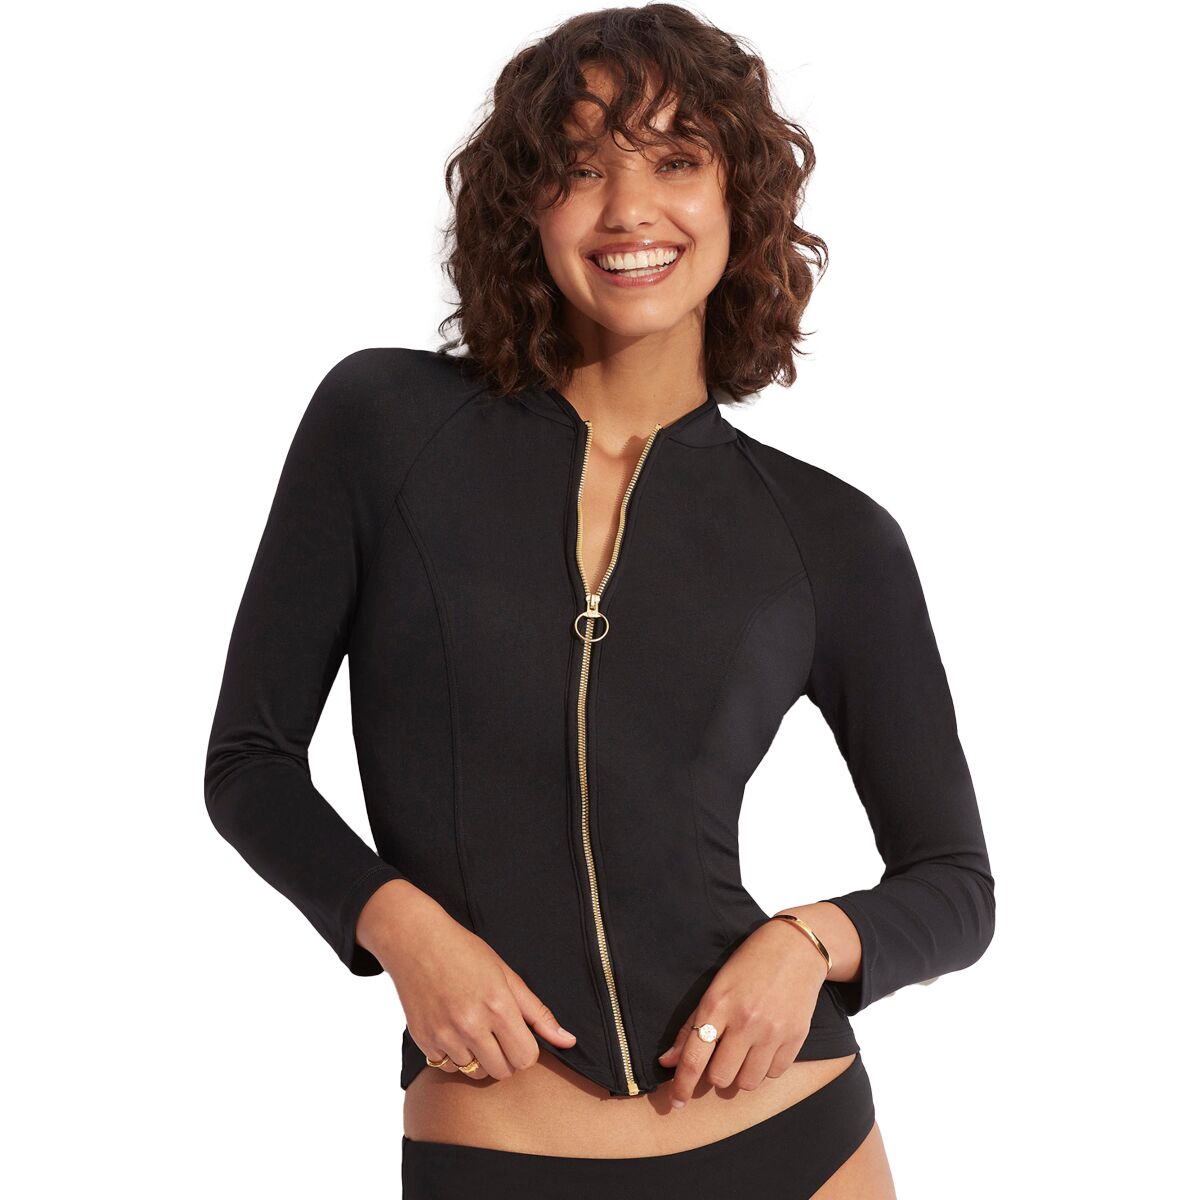 Seafolly Seafolly Collective Long Sleeve Sunvest Top - Women's